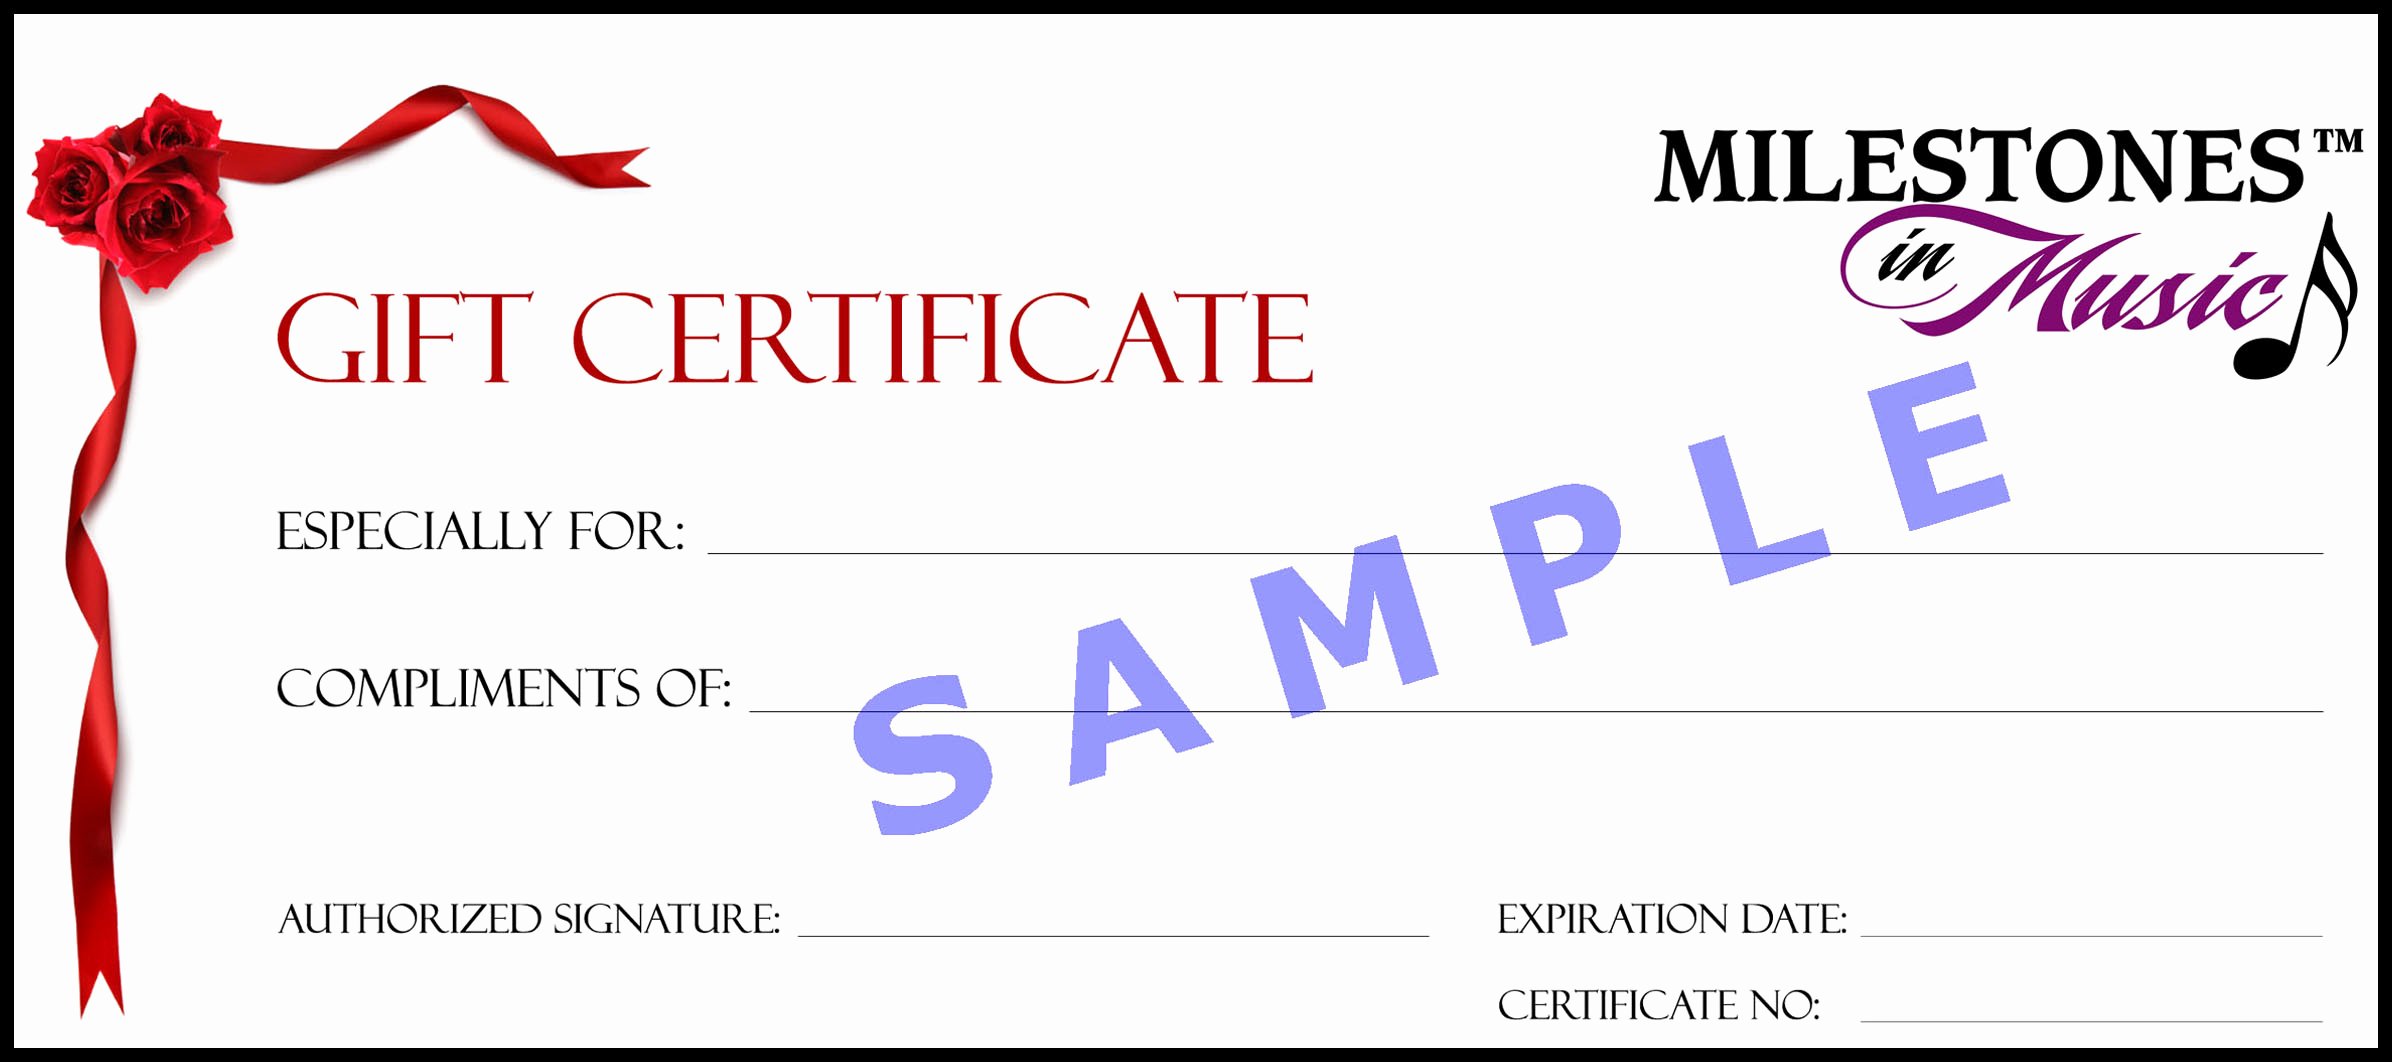 Sample Gift Certificate Wording Unique 18 Gift Certificate Templates Excel Pdf formats